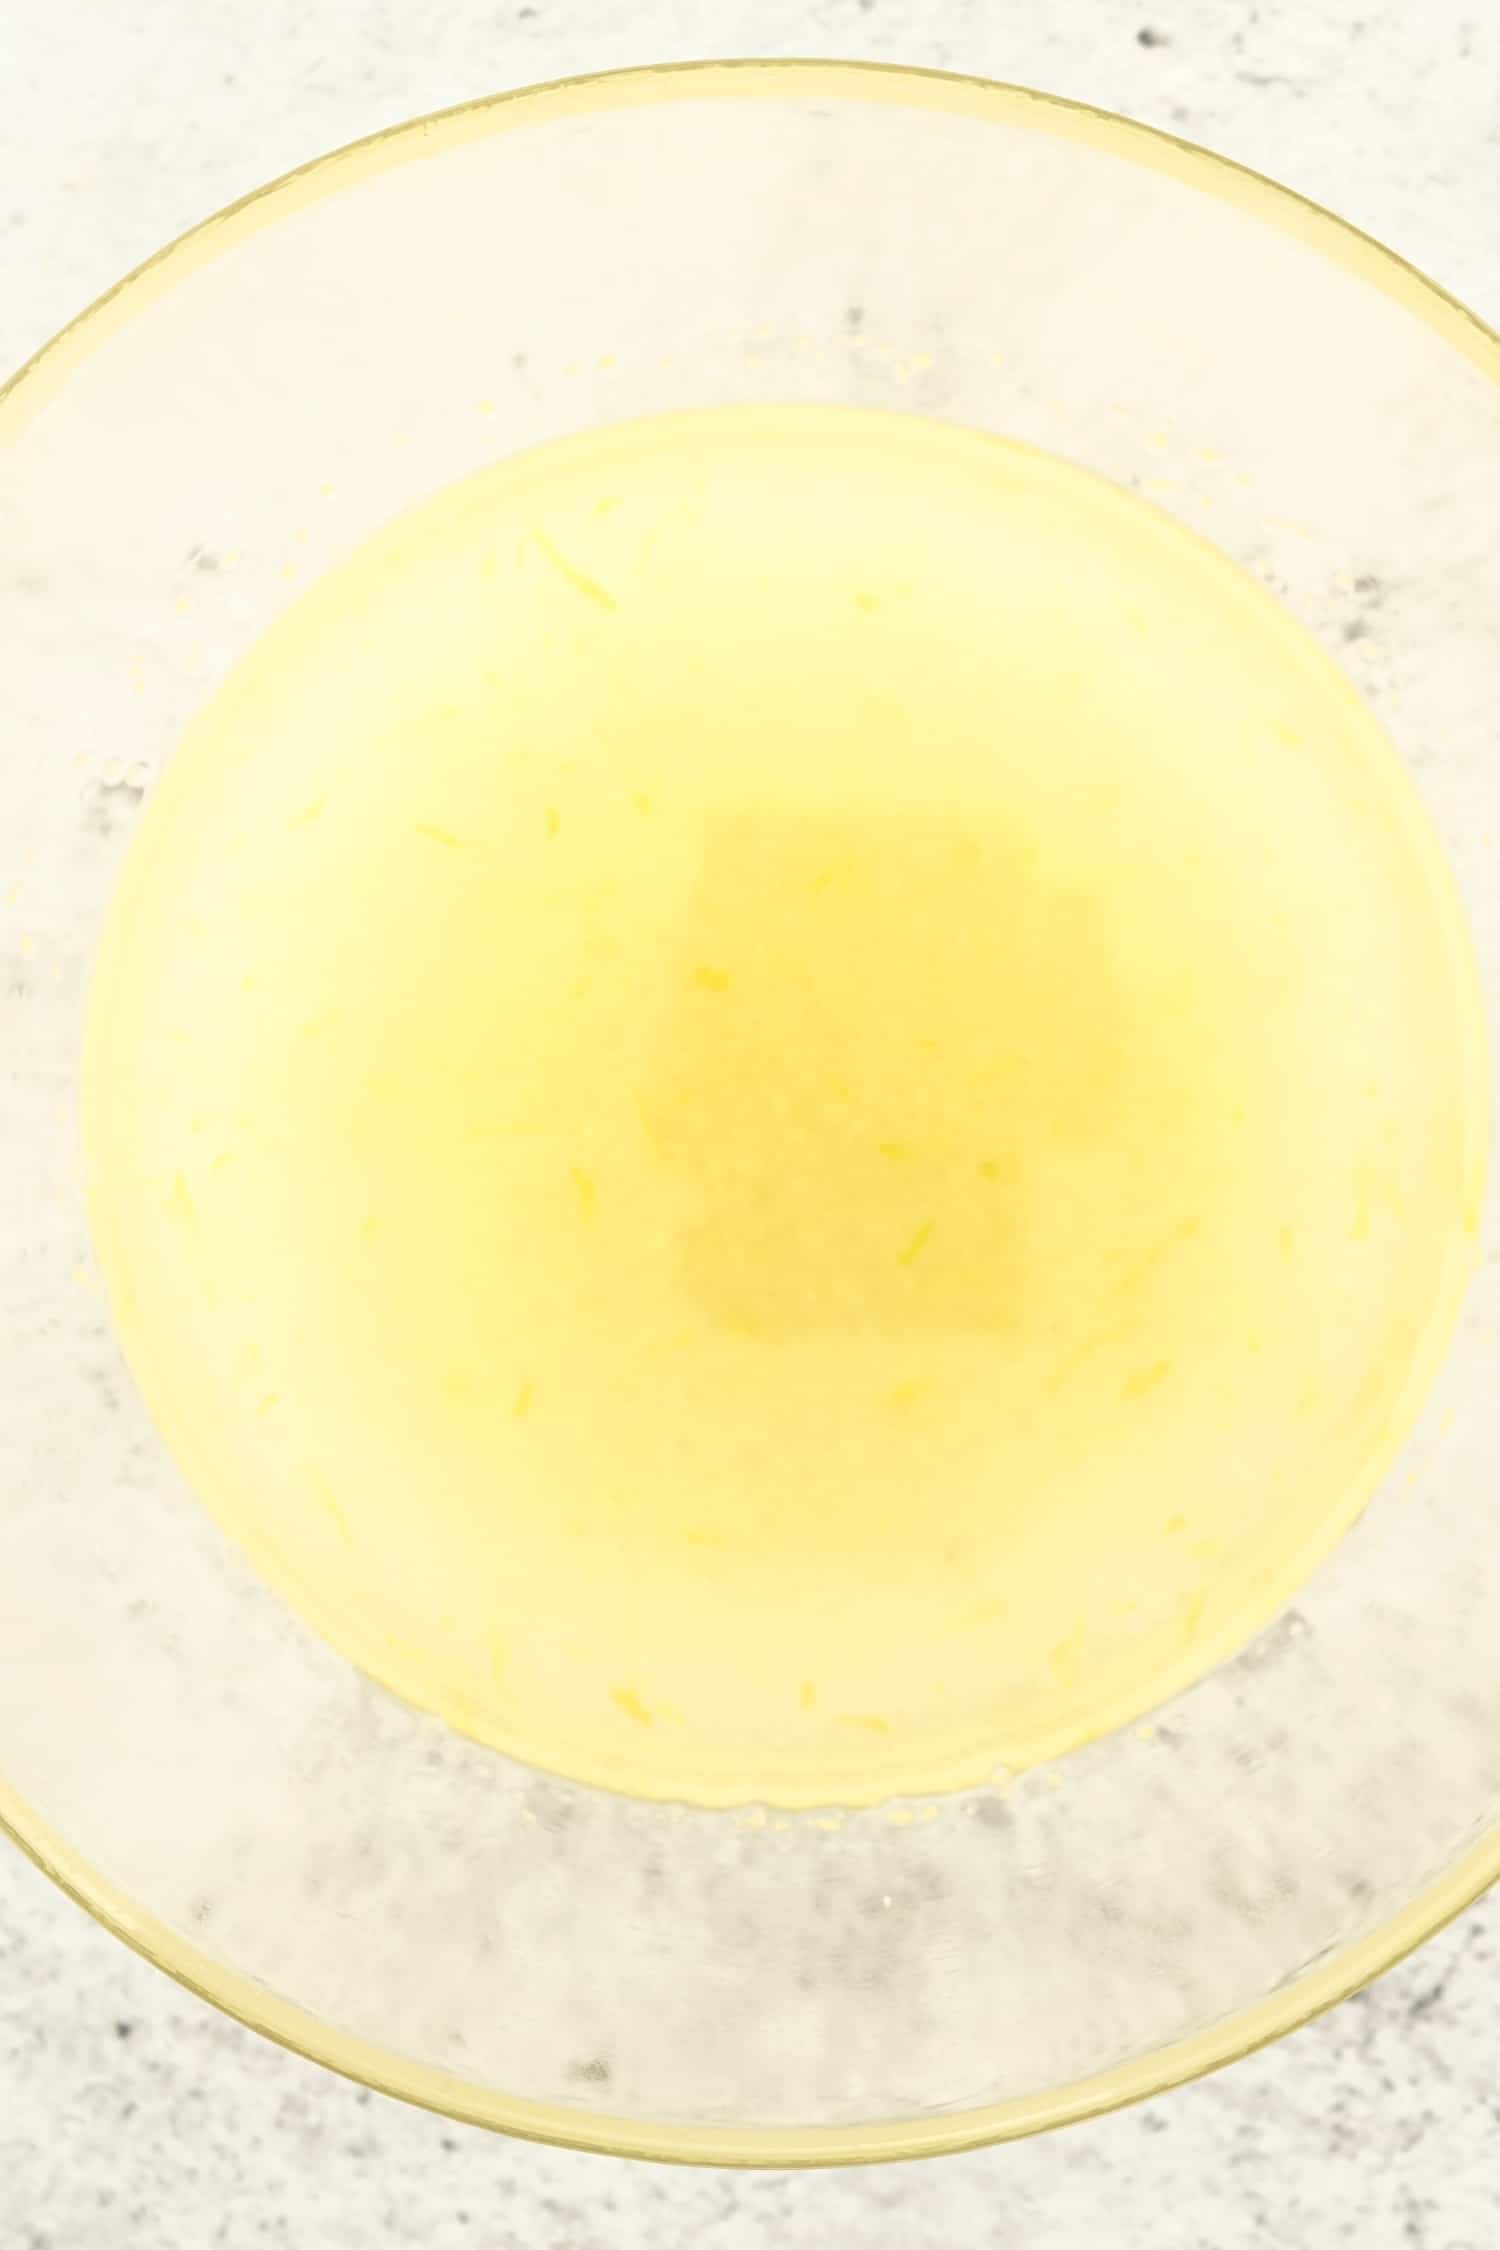 A pale yellow mixture in a glass bowl.